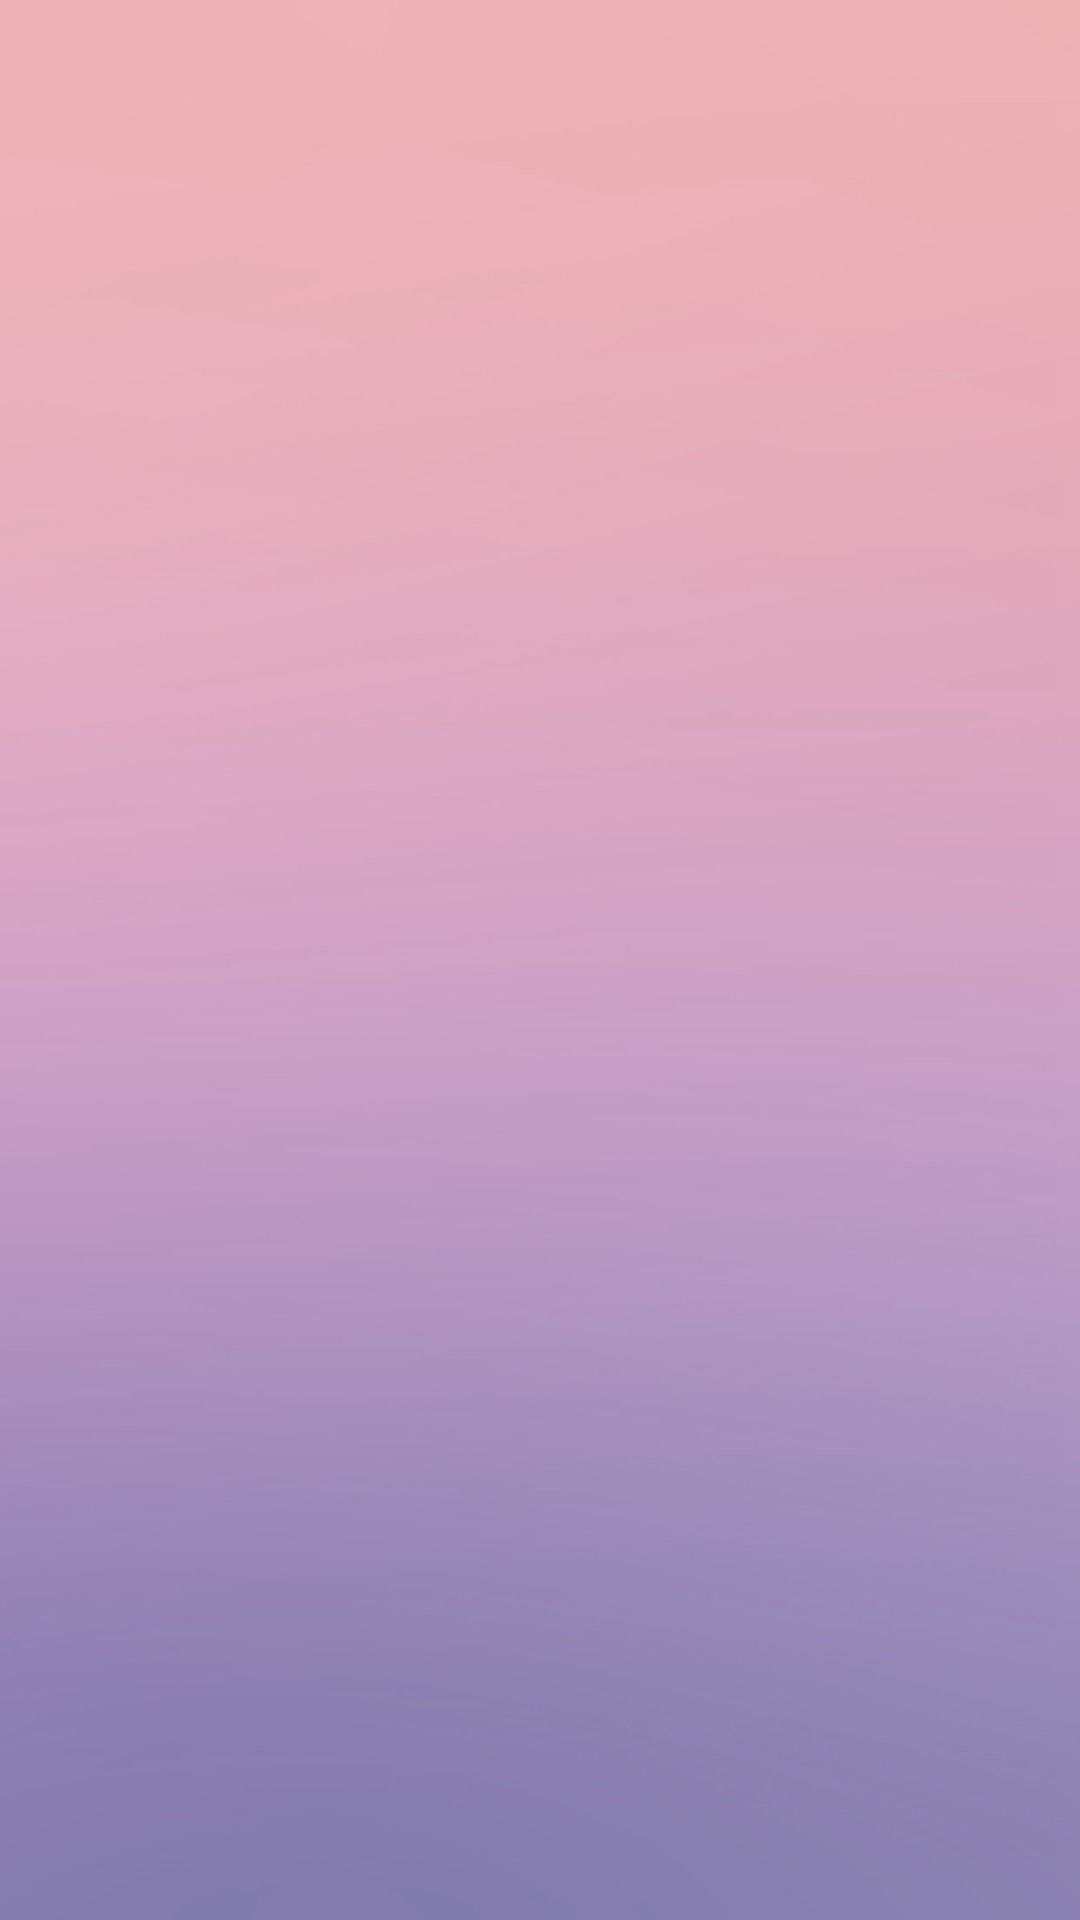 Gradients ideas. iphone wallpaper, solid color background, ombre wallpaper